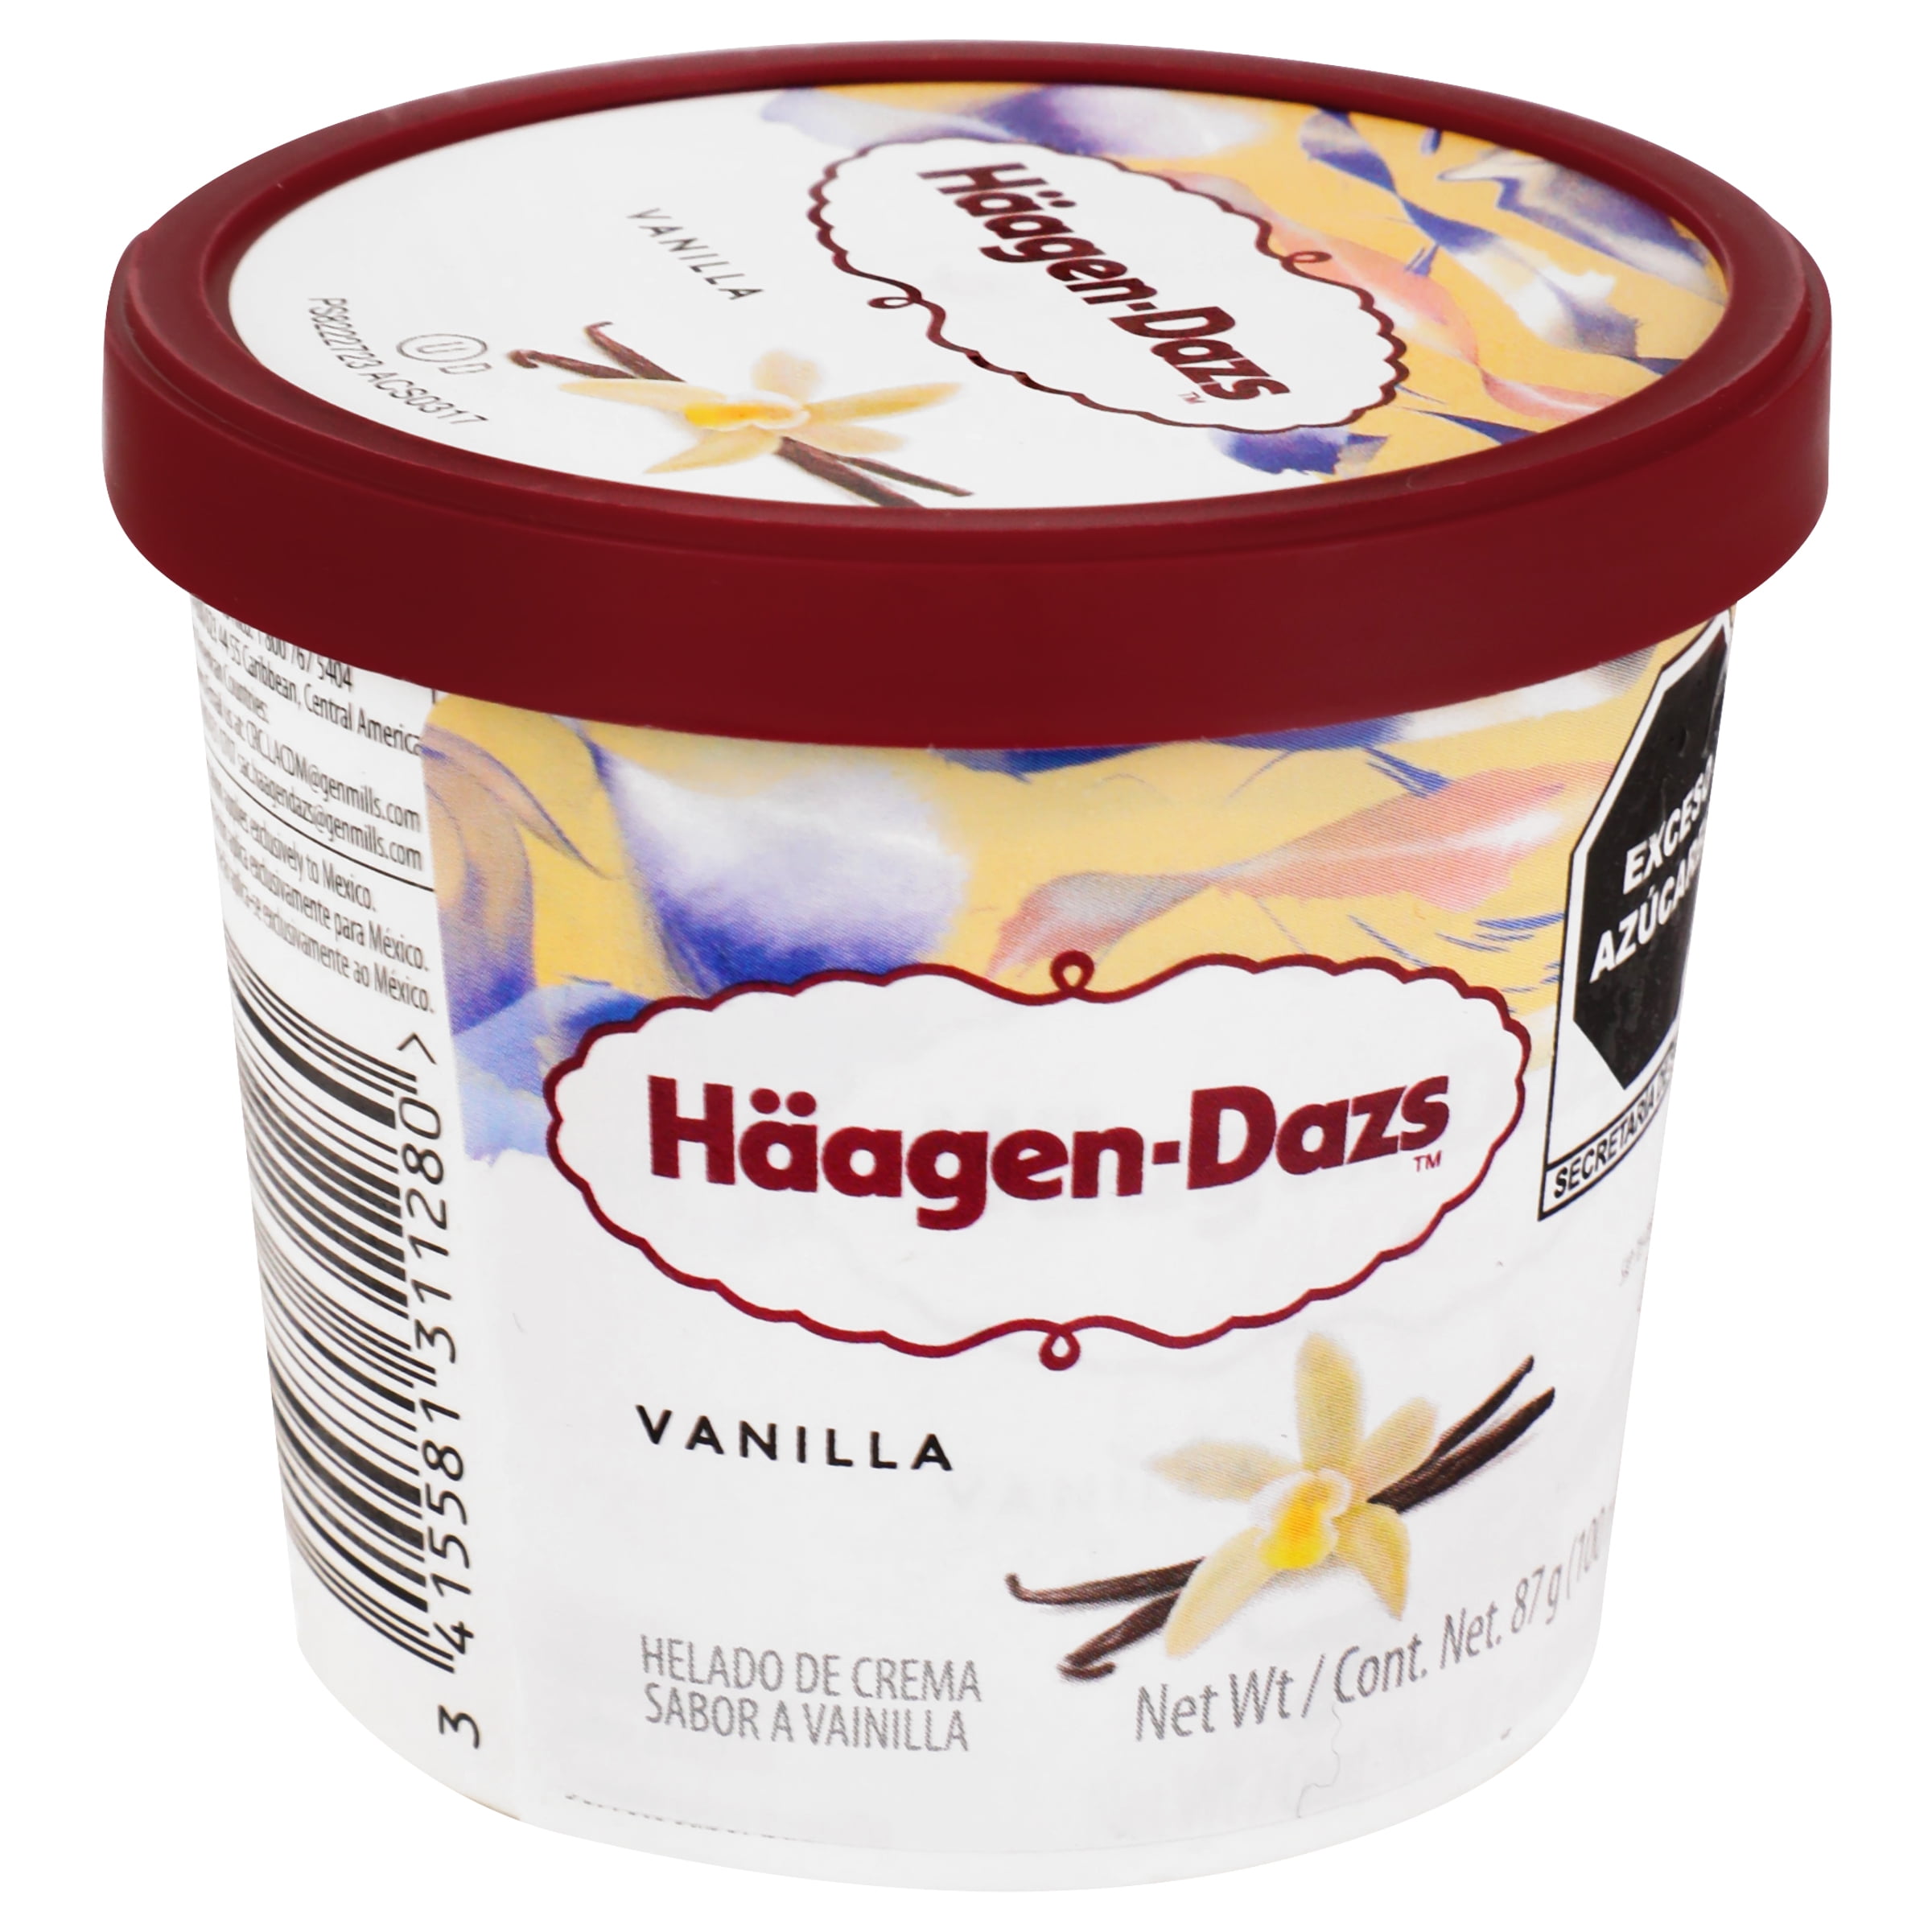 Buy Haagen-dazs Products Online in Hungary at Best Prices